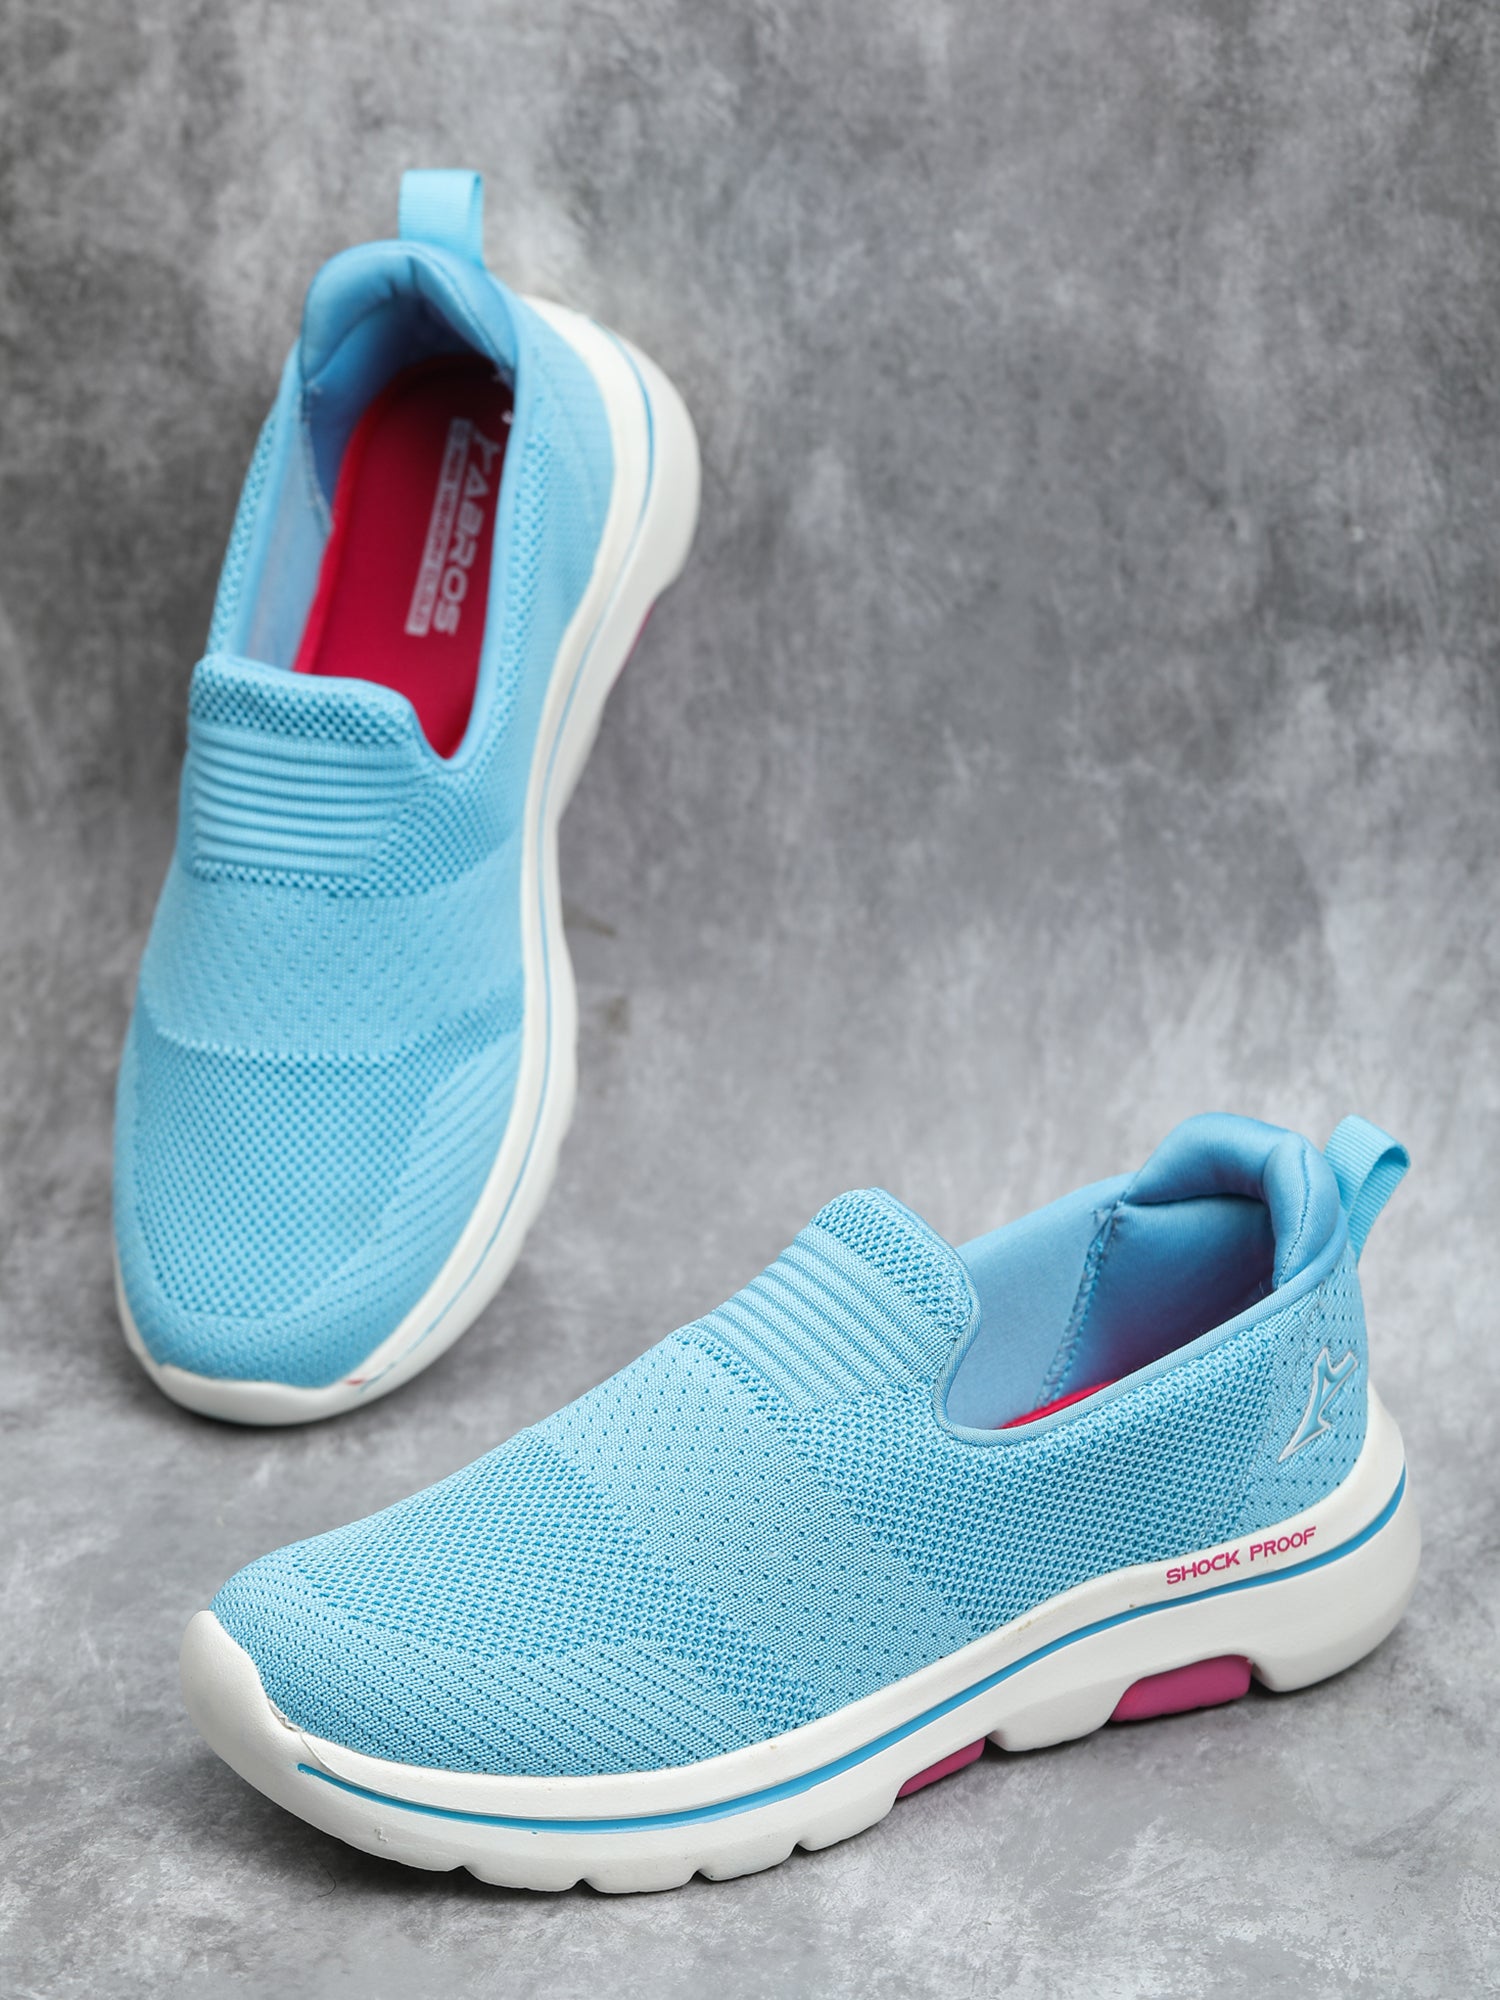 VICTORIA SPORTS SHOES FOR WOMEN